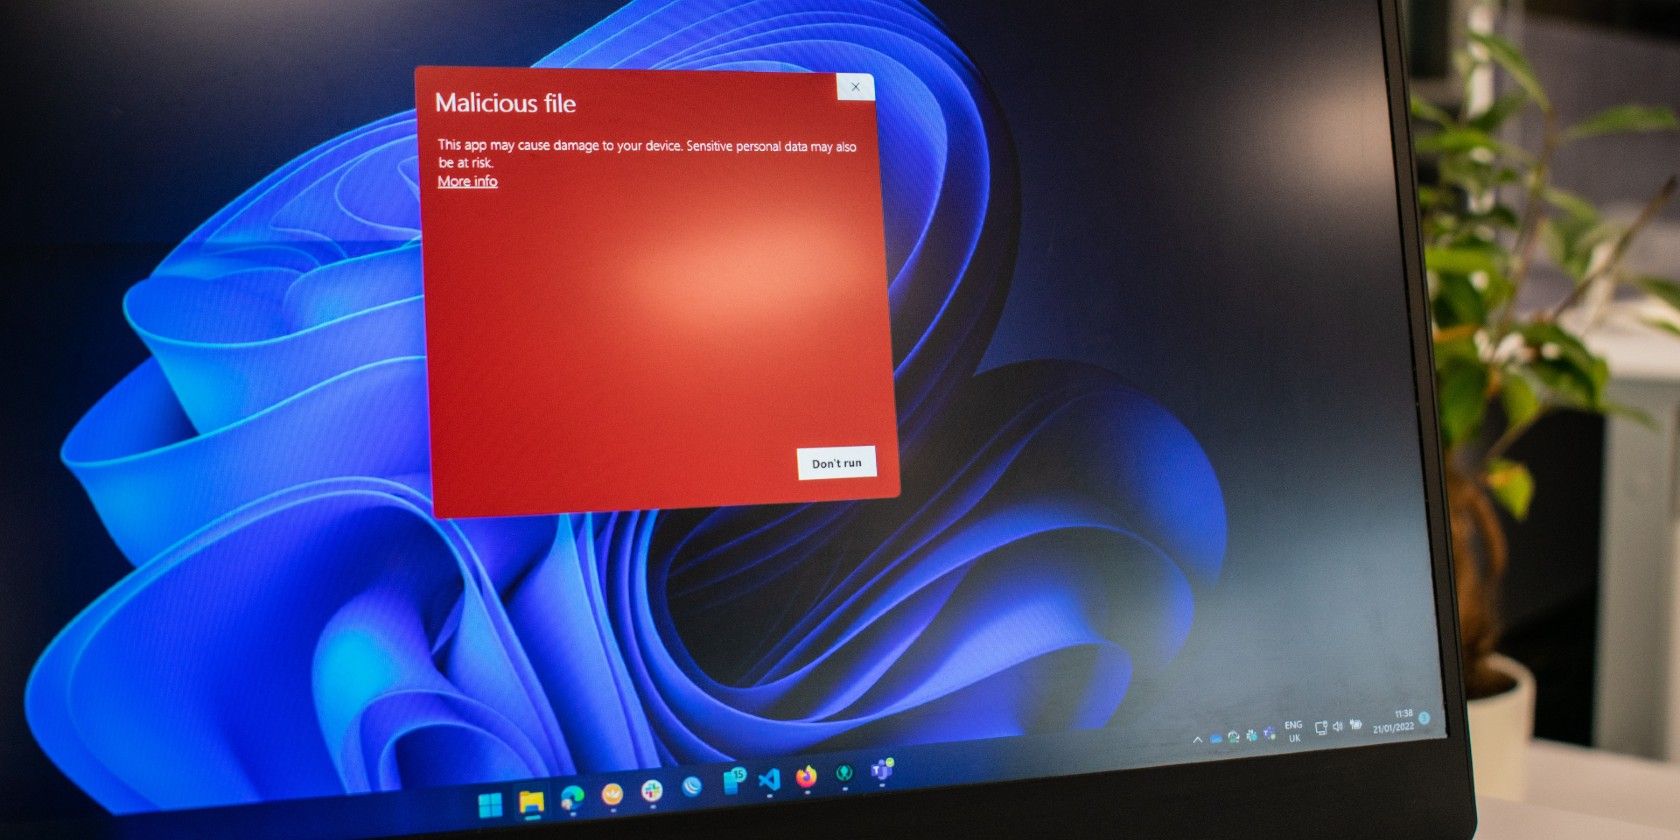 A laptop screen showing a red malicious file warning popup.